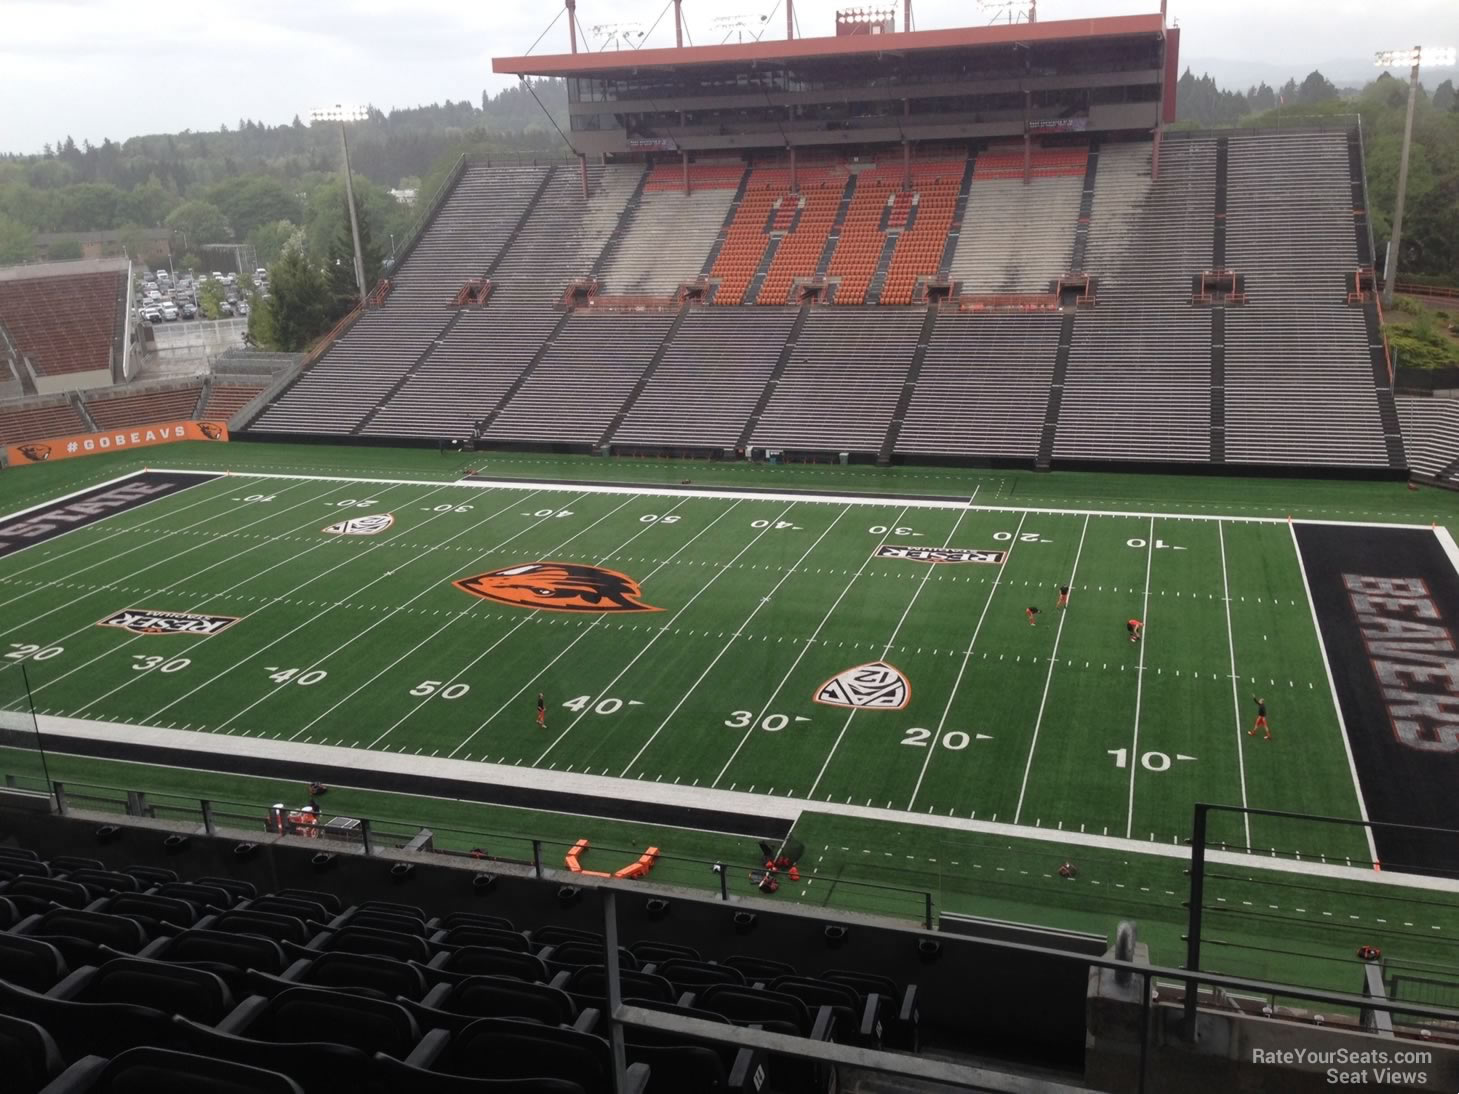 section 217, row 18 seat view  - reser stadium